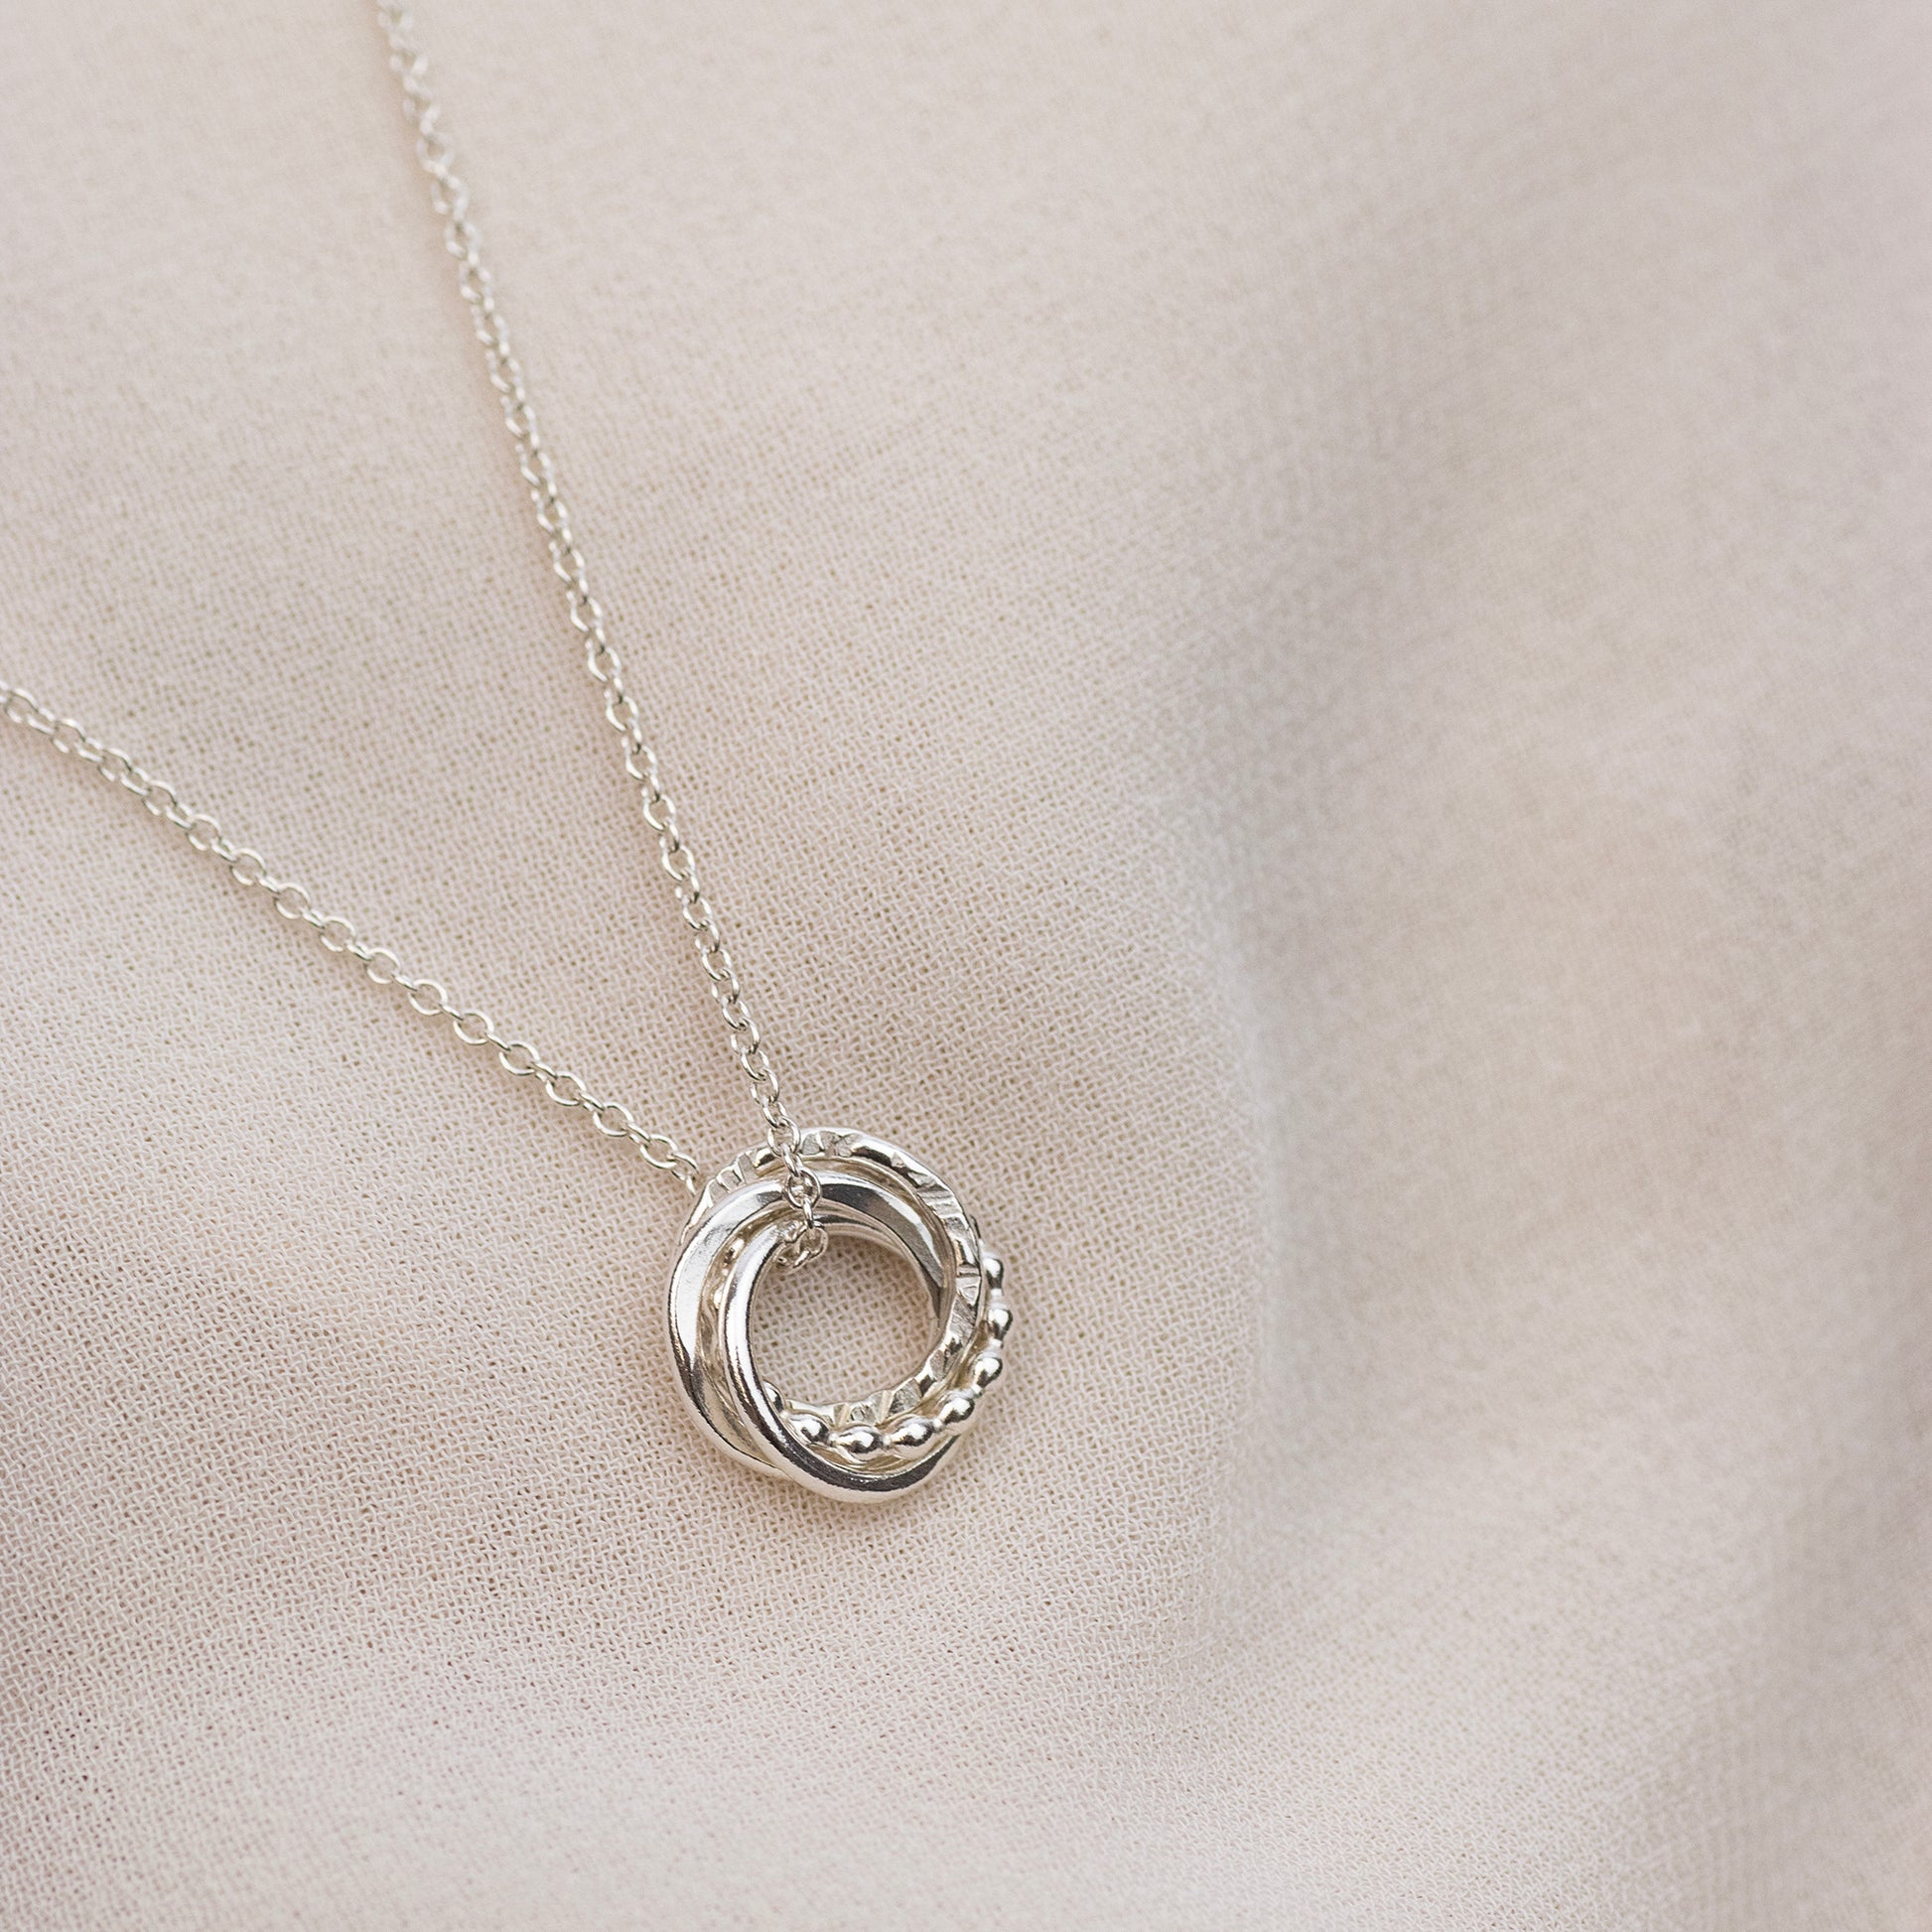 4 Friends Necklace - Silver Love Knot 